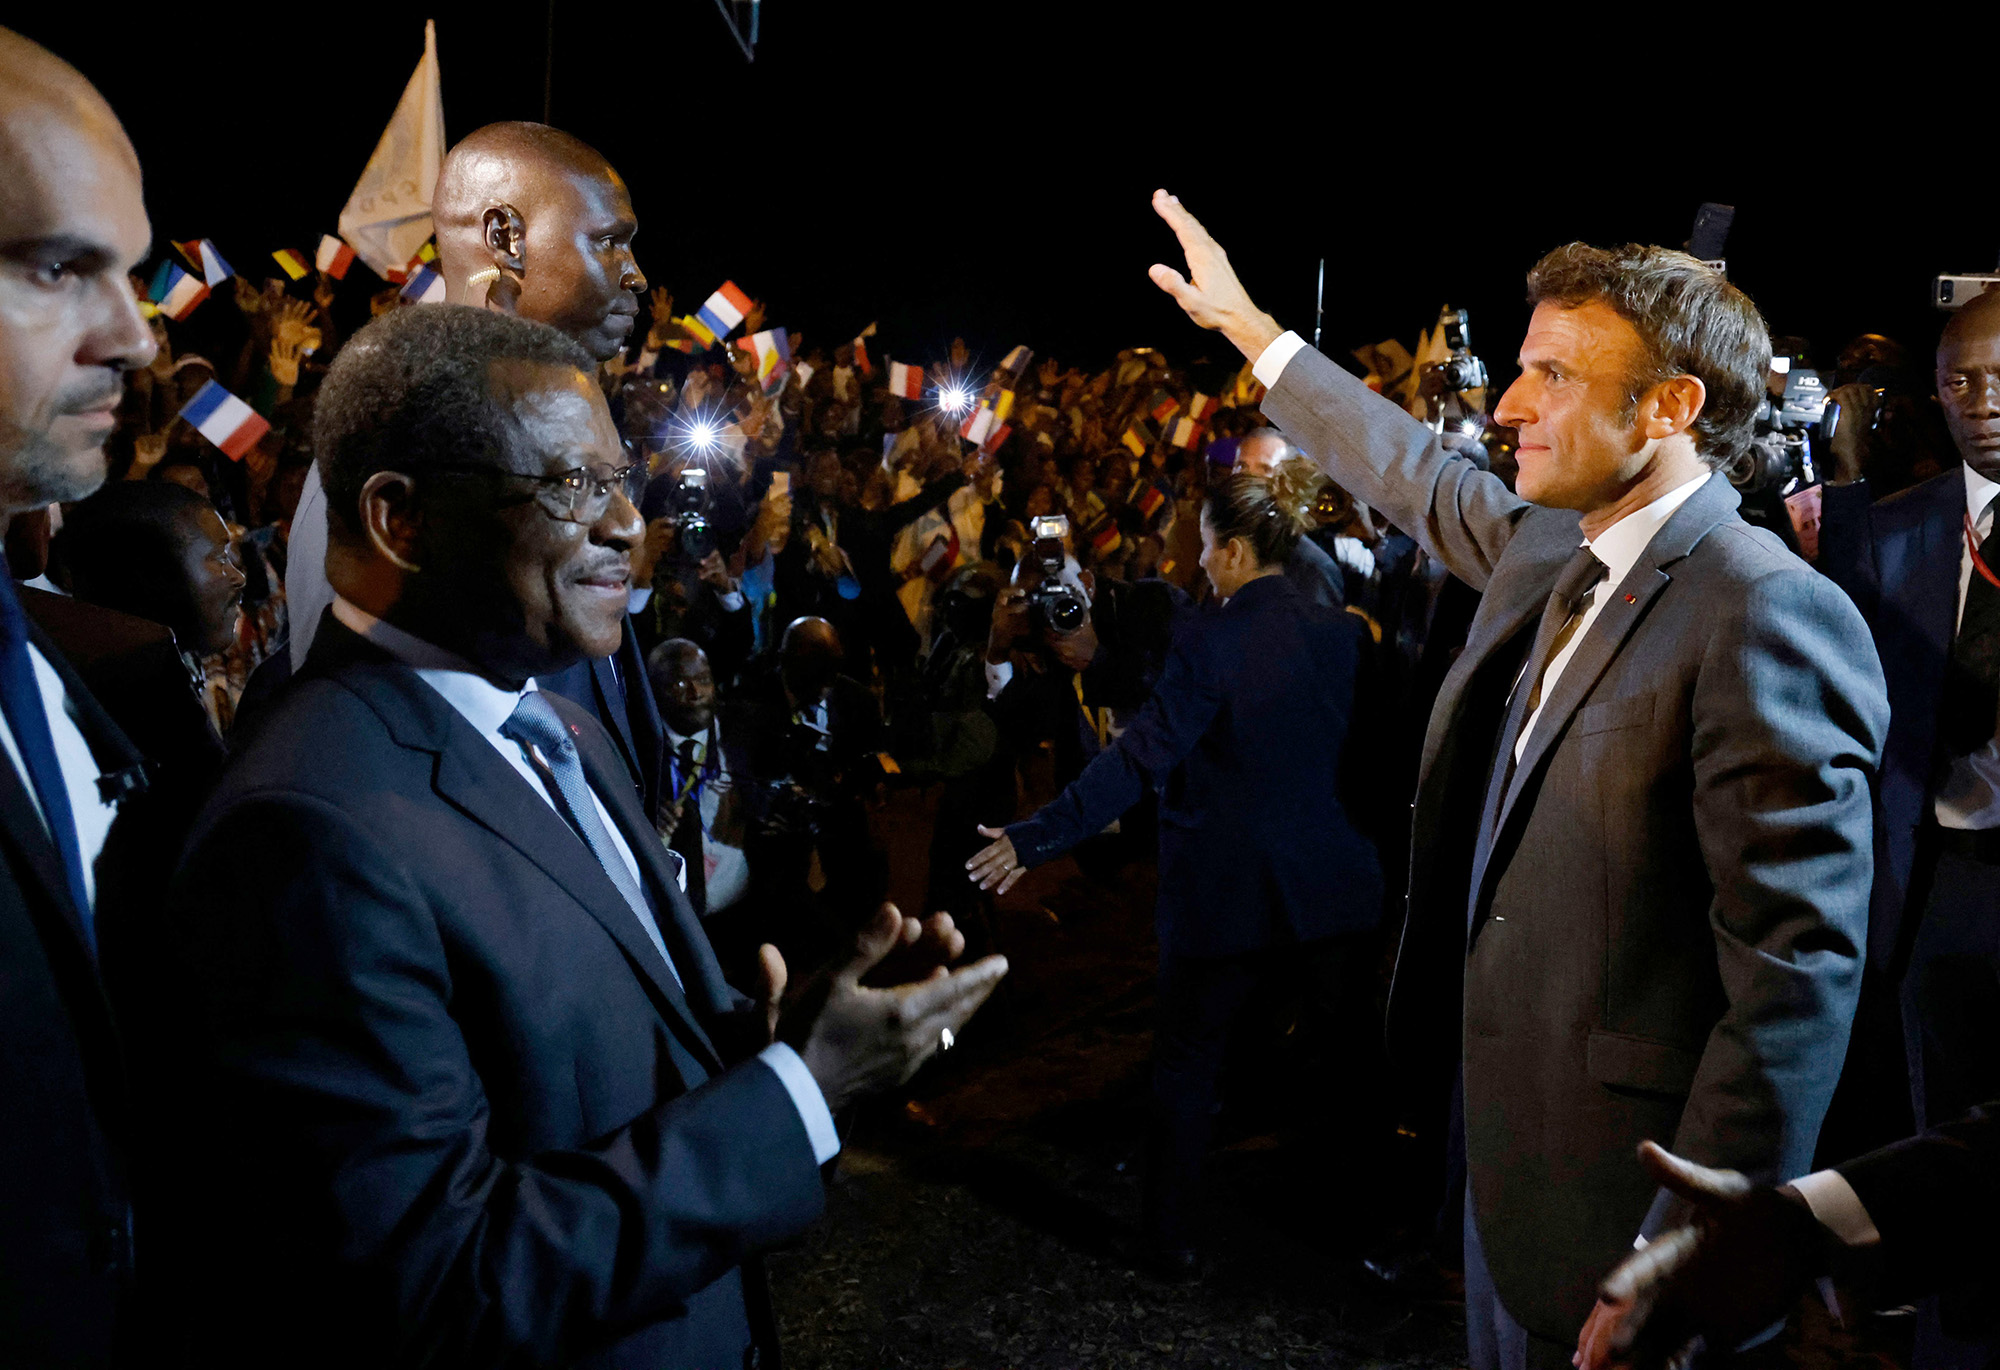 French president Emmanuel Macron waves to the crowd after being welcomed by Cameroonese Prime Minister Joseph Dion Ngute upon his arrival at the Nsimalen international airport of Yaounde, Cameroon, on July 25.